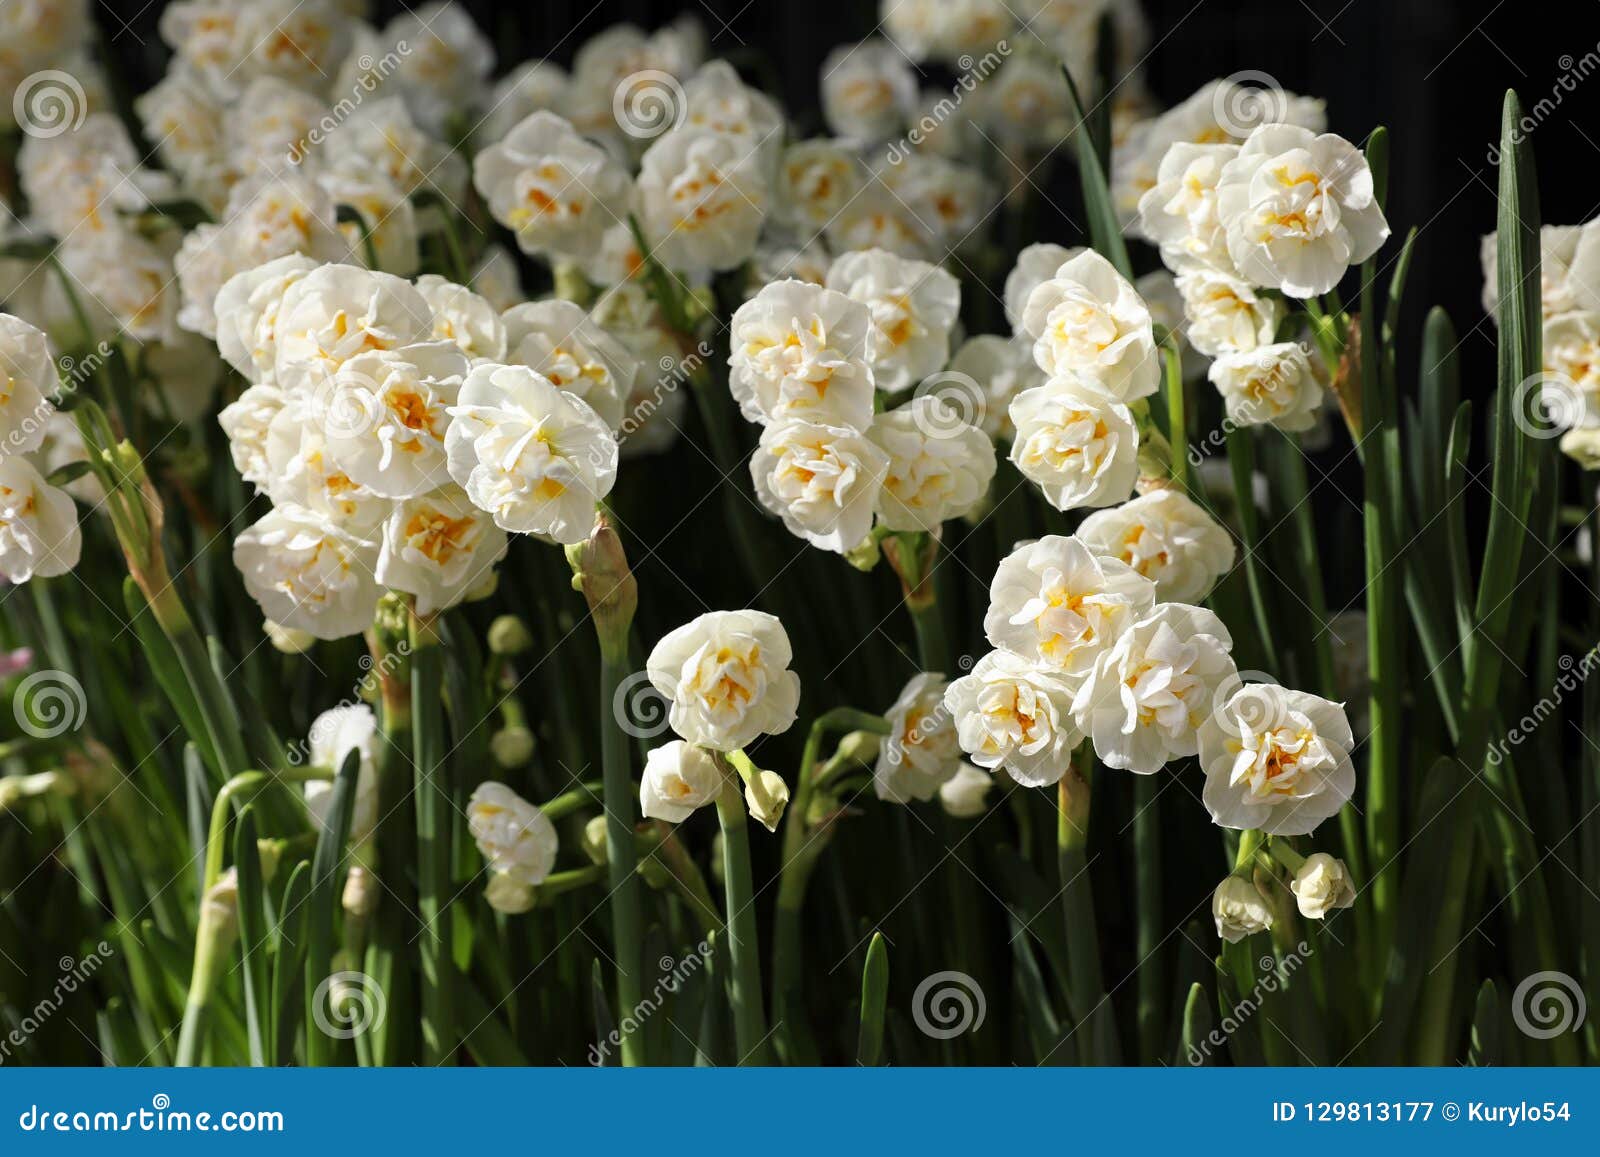 Double Daffodil Narcissus X Hybridus in the Garden of Flowers Shop. Stock  Image - Image of floret, bloom: 129813177